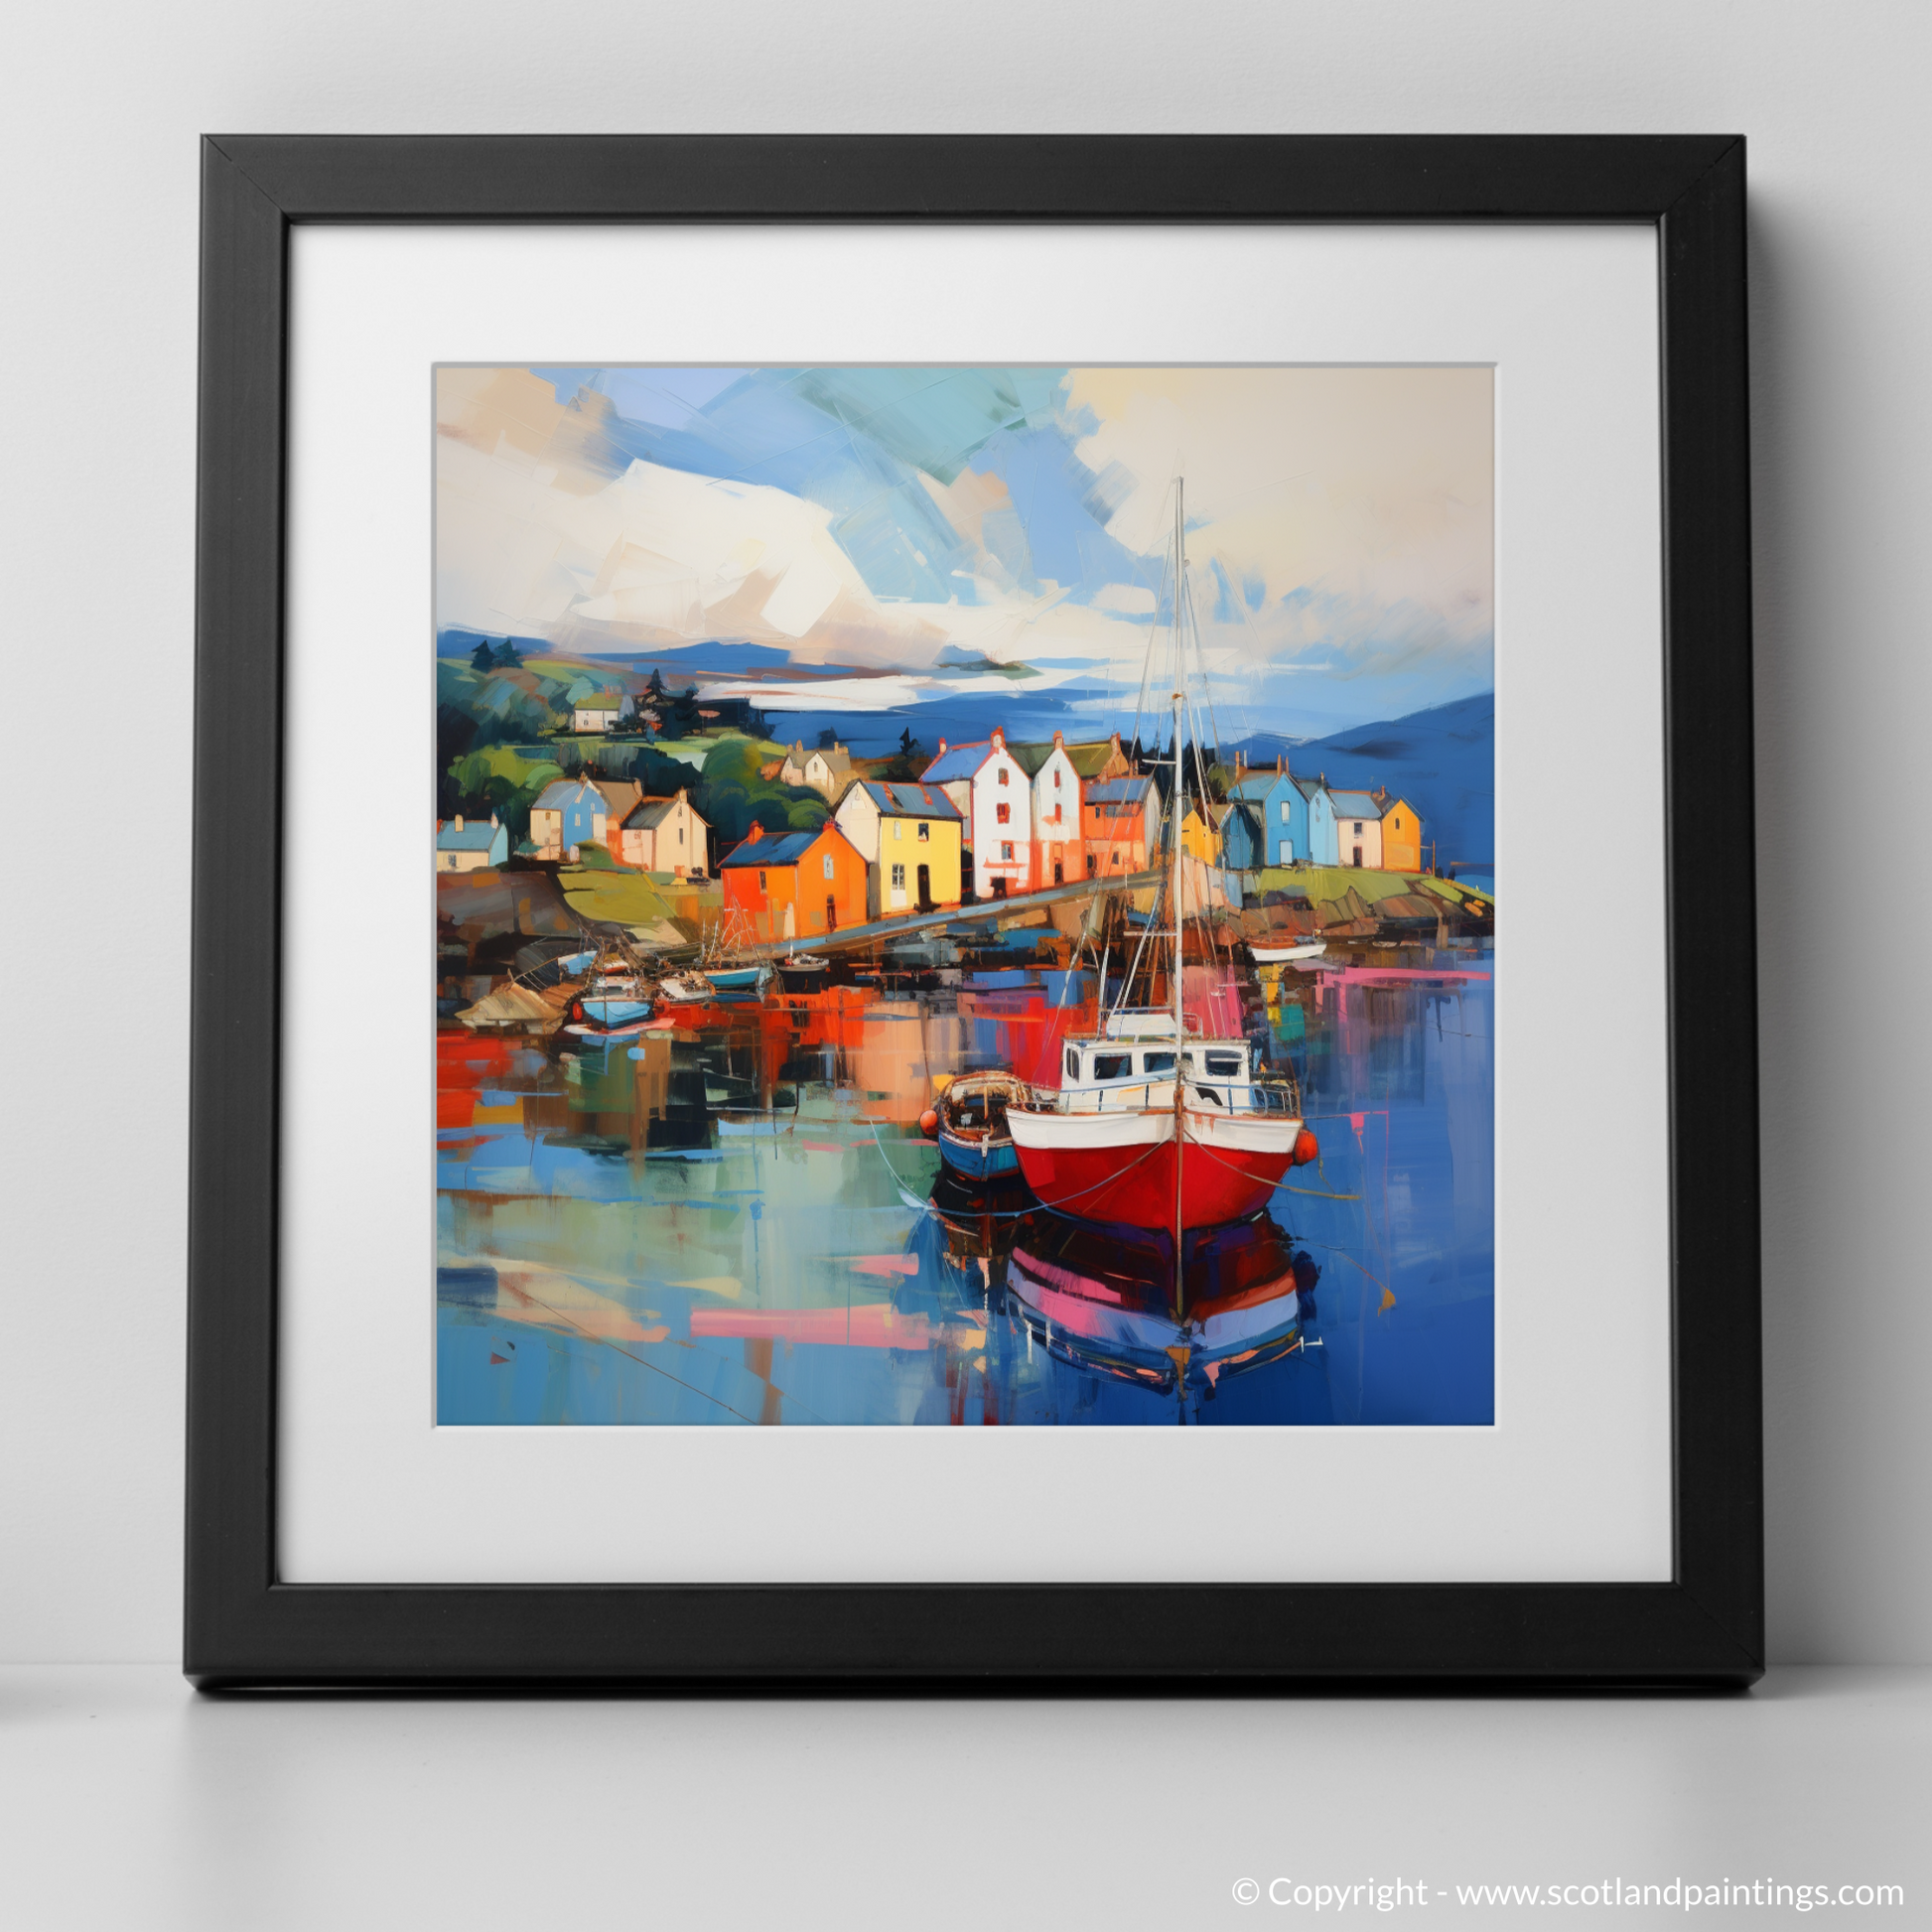 Art Print of Millport Harbour, Isle of Cumbrae with a black frame